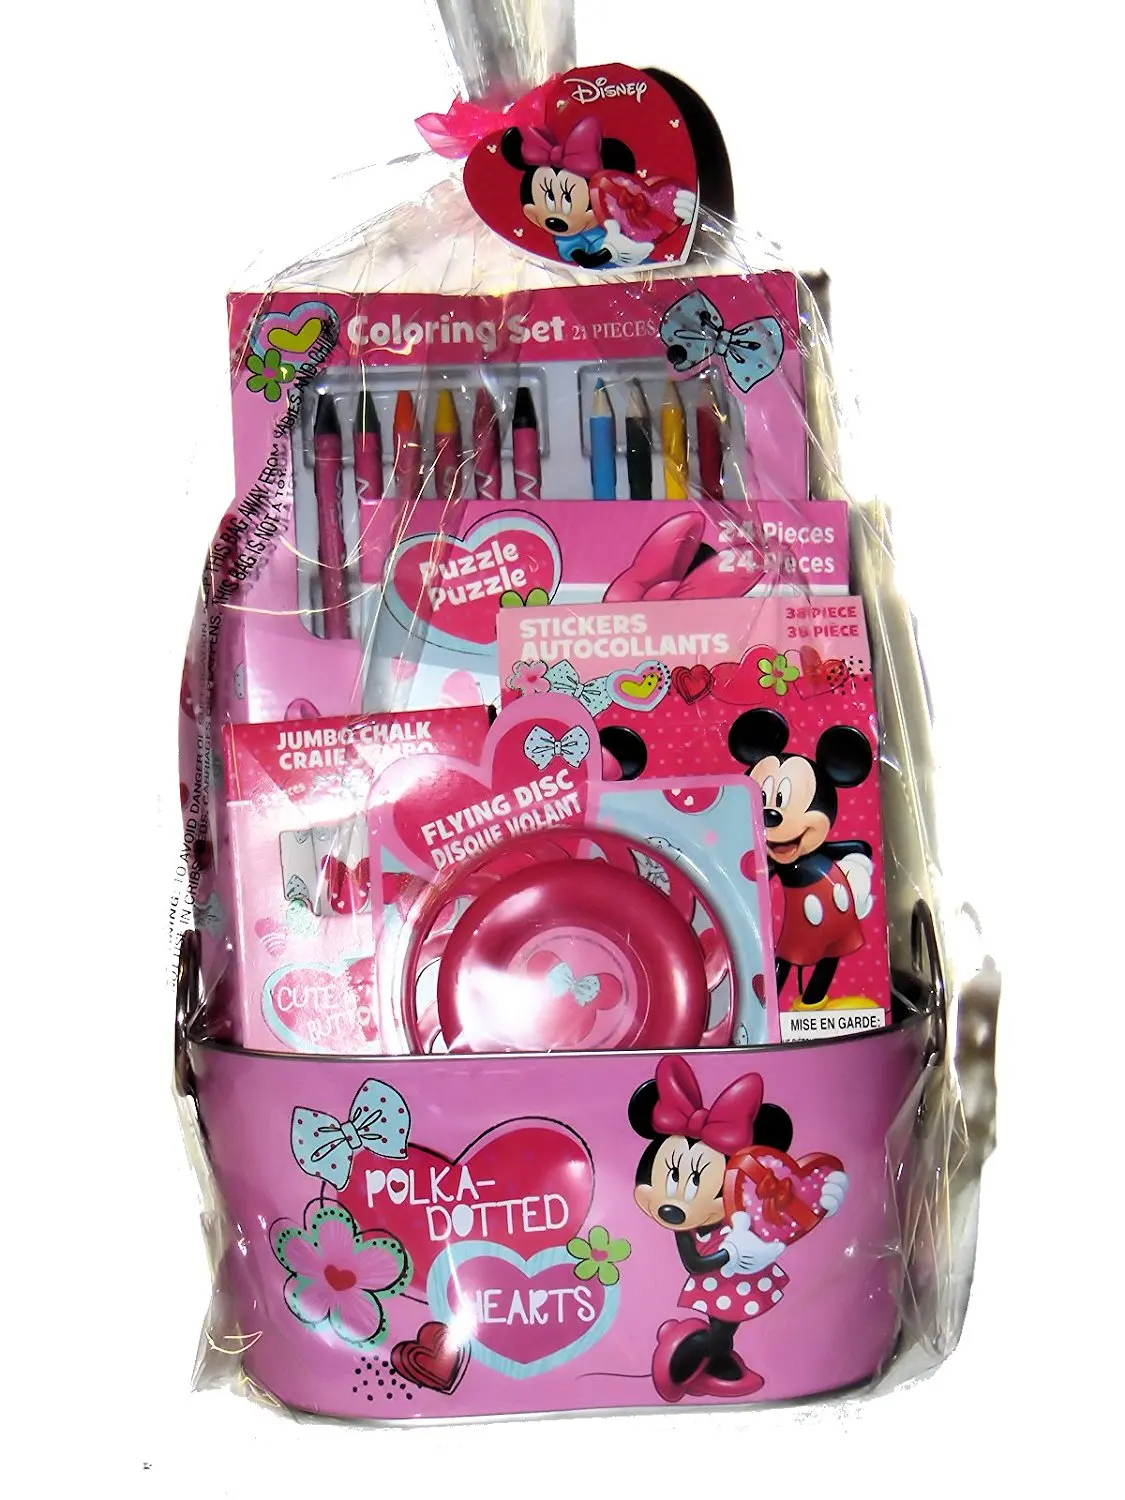 minnie mouse easter baskets